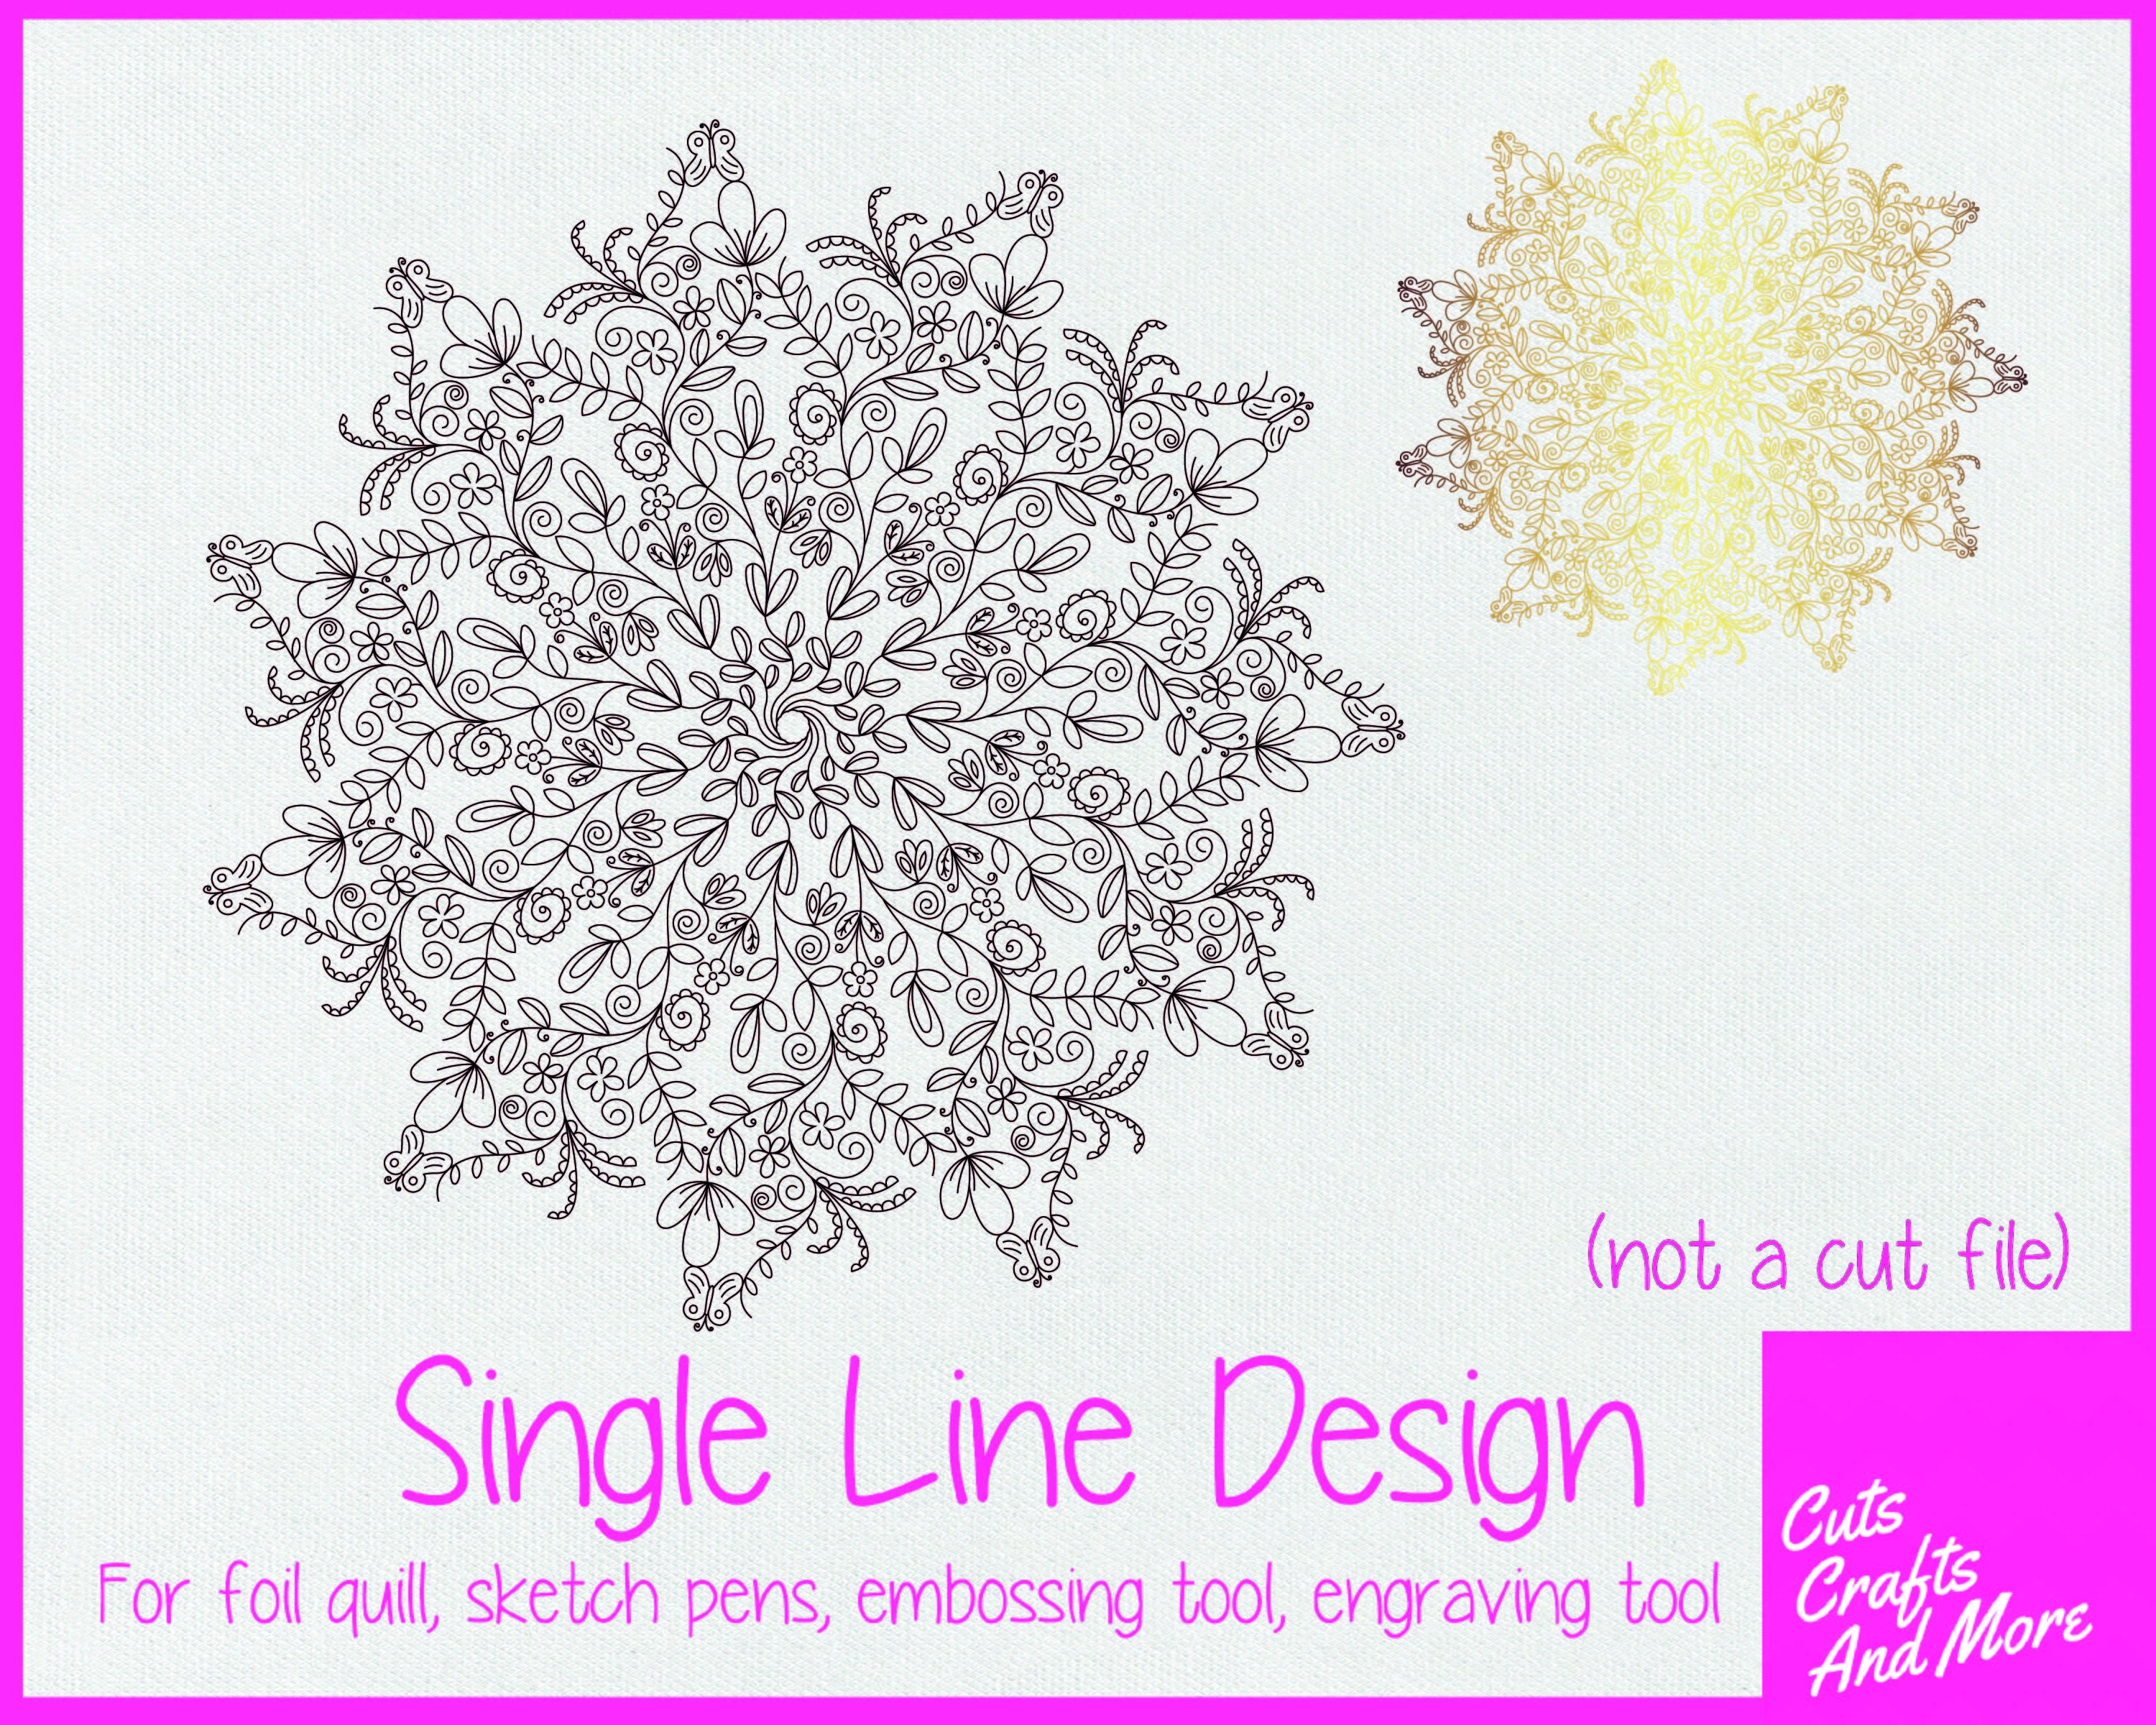 Thank You Single Line Svg, Foil, Quill, Emboss, Invisible Ink, Sketch Pen,  Engraving, Digital Download, Cricut Silhouette, Card Making 